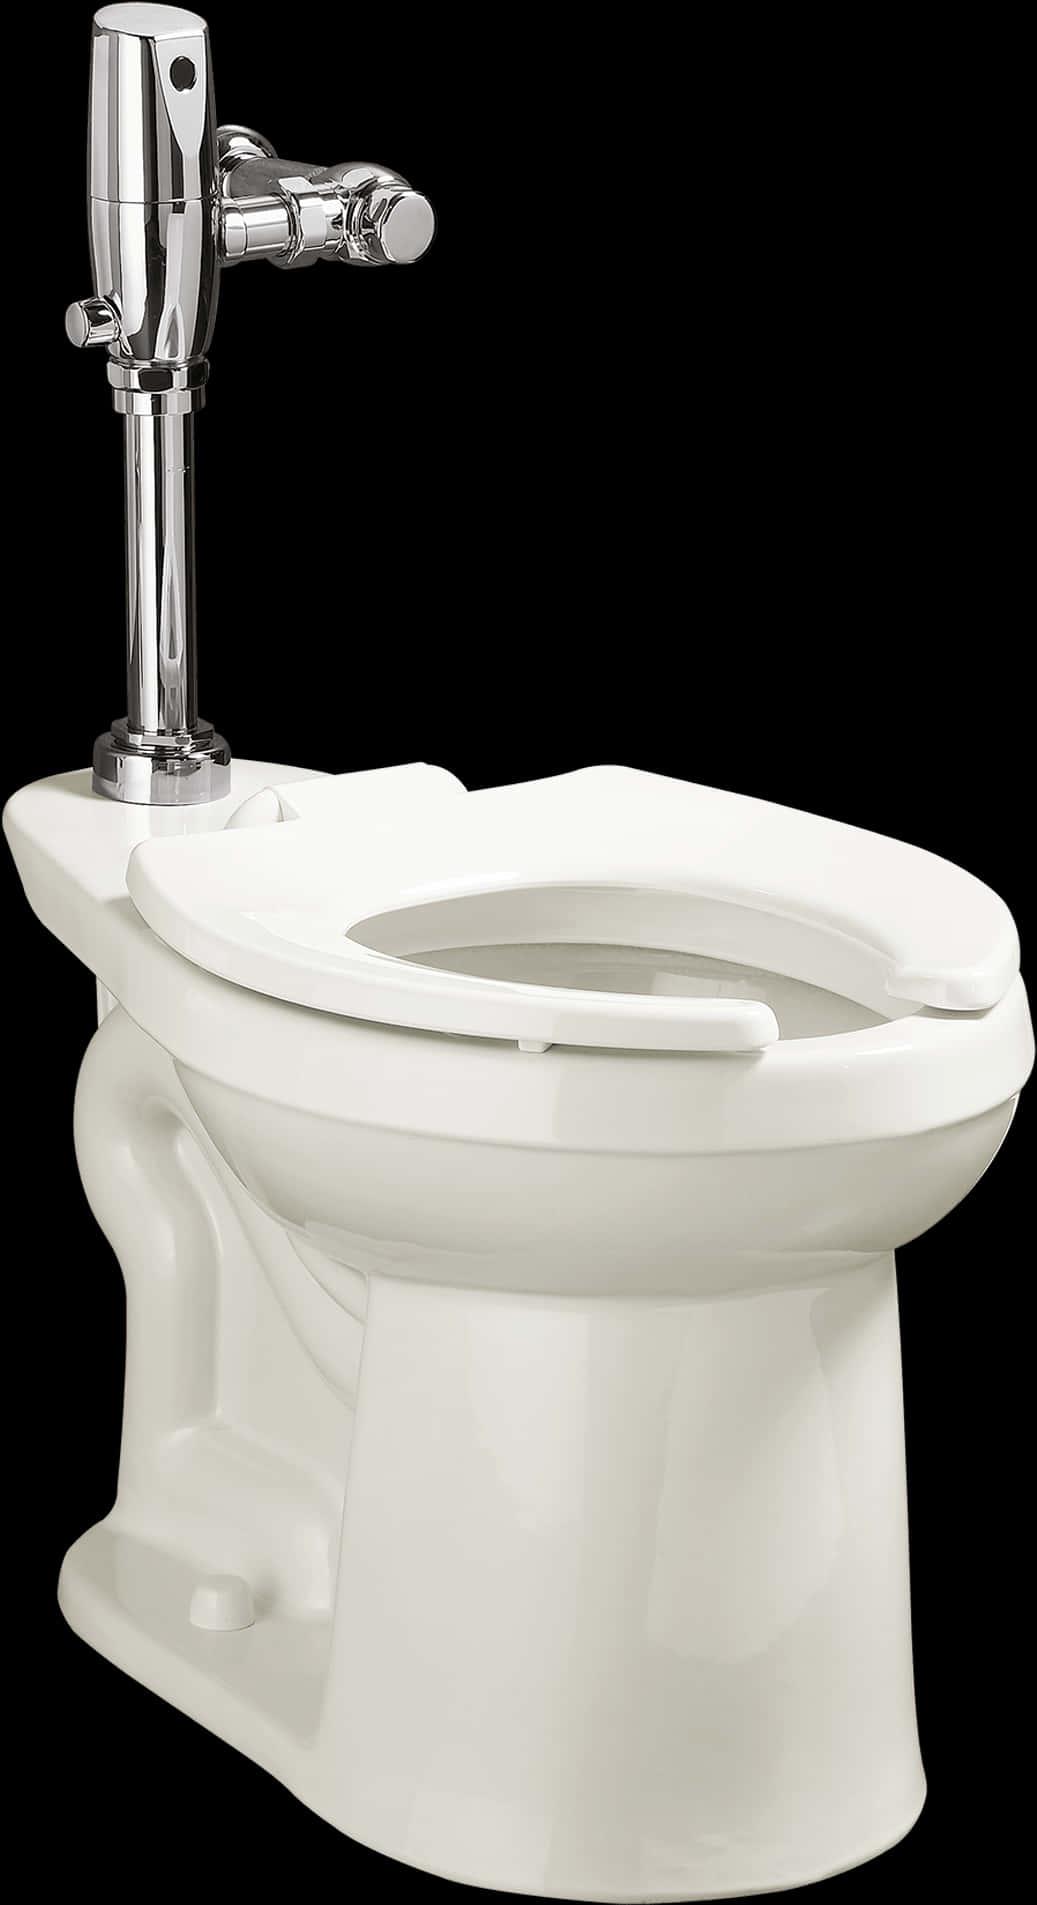 Modern White Toiletwith Flush Handle PNG image